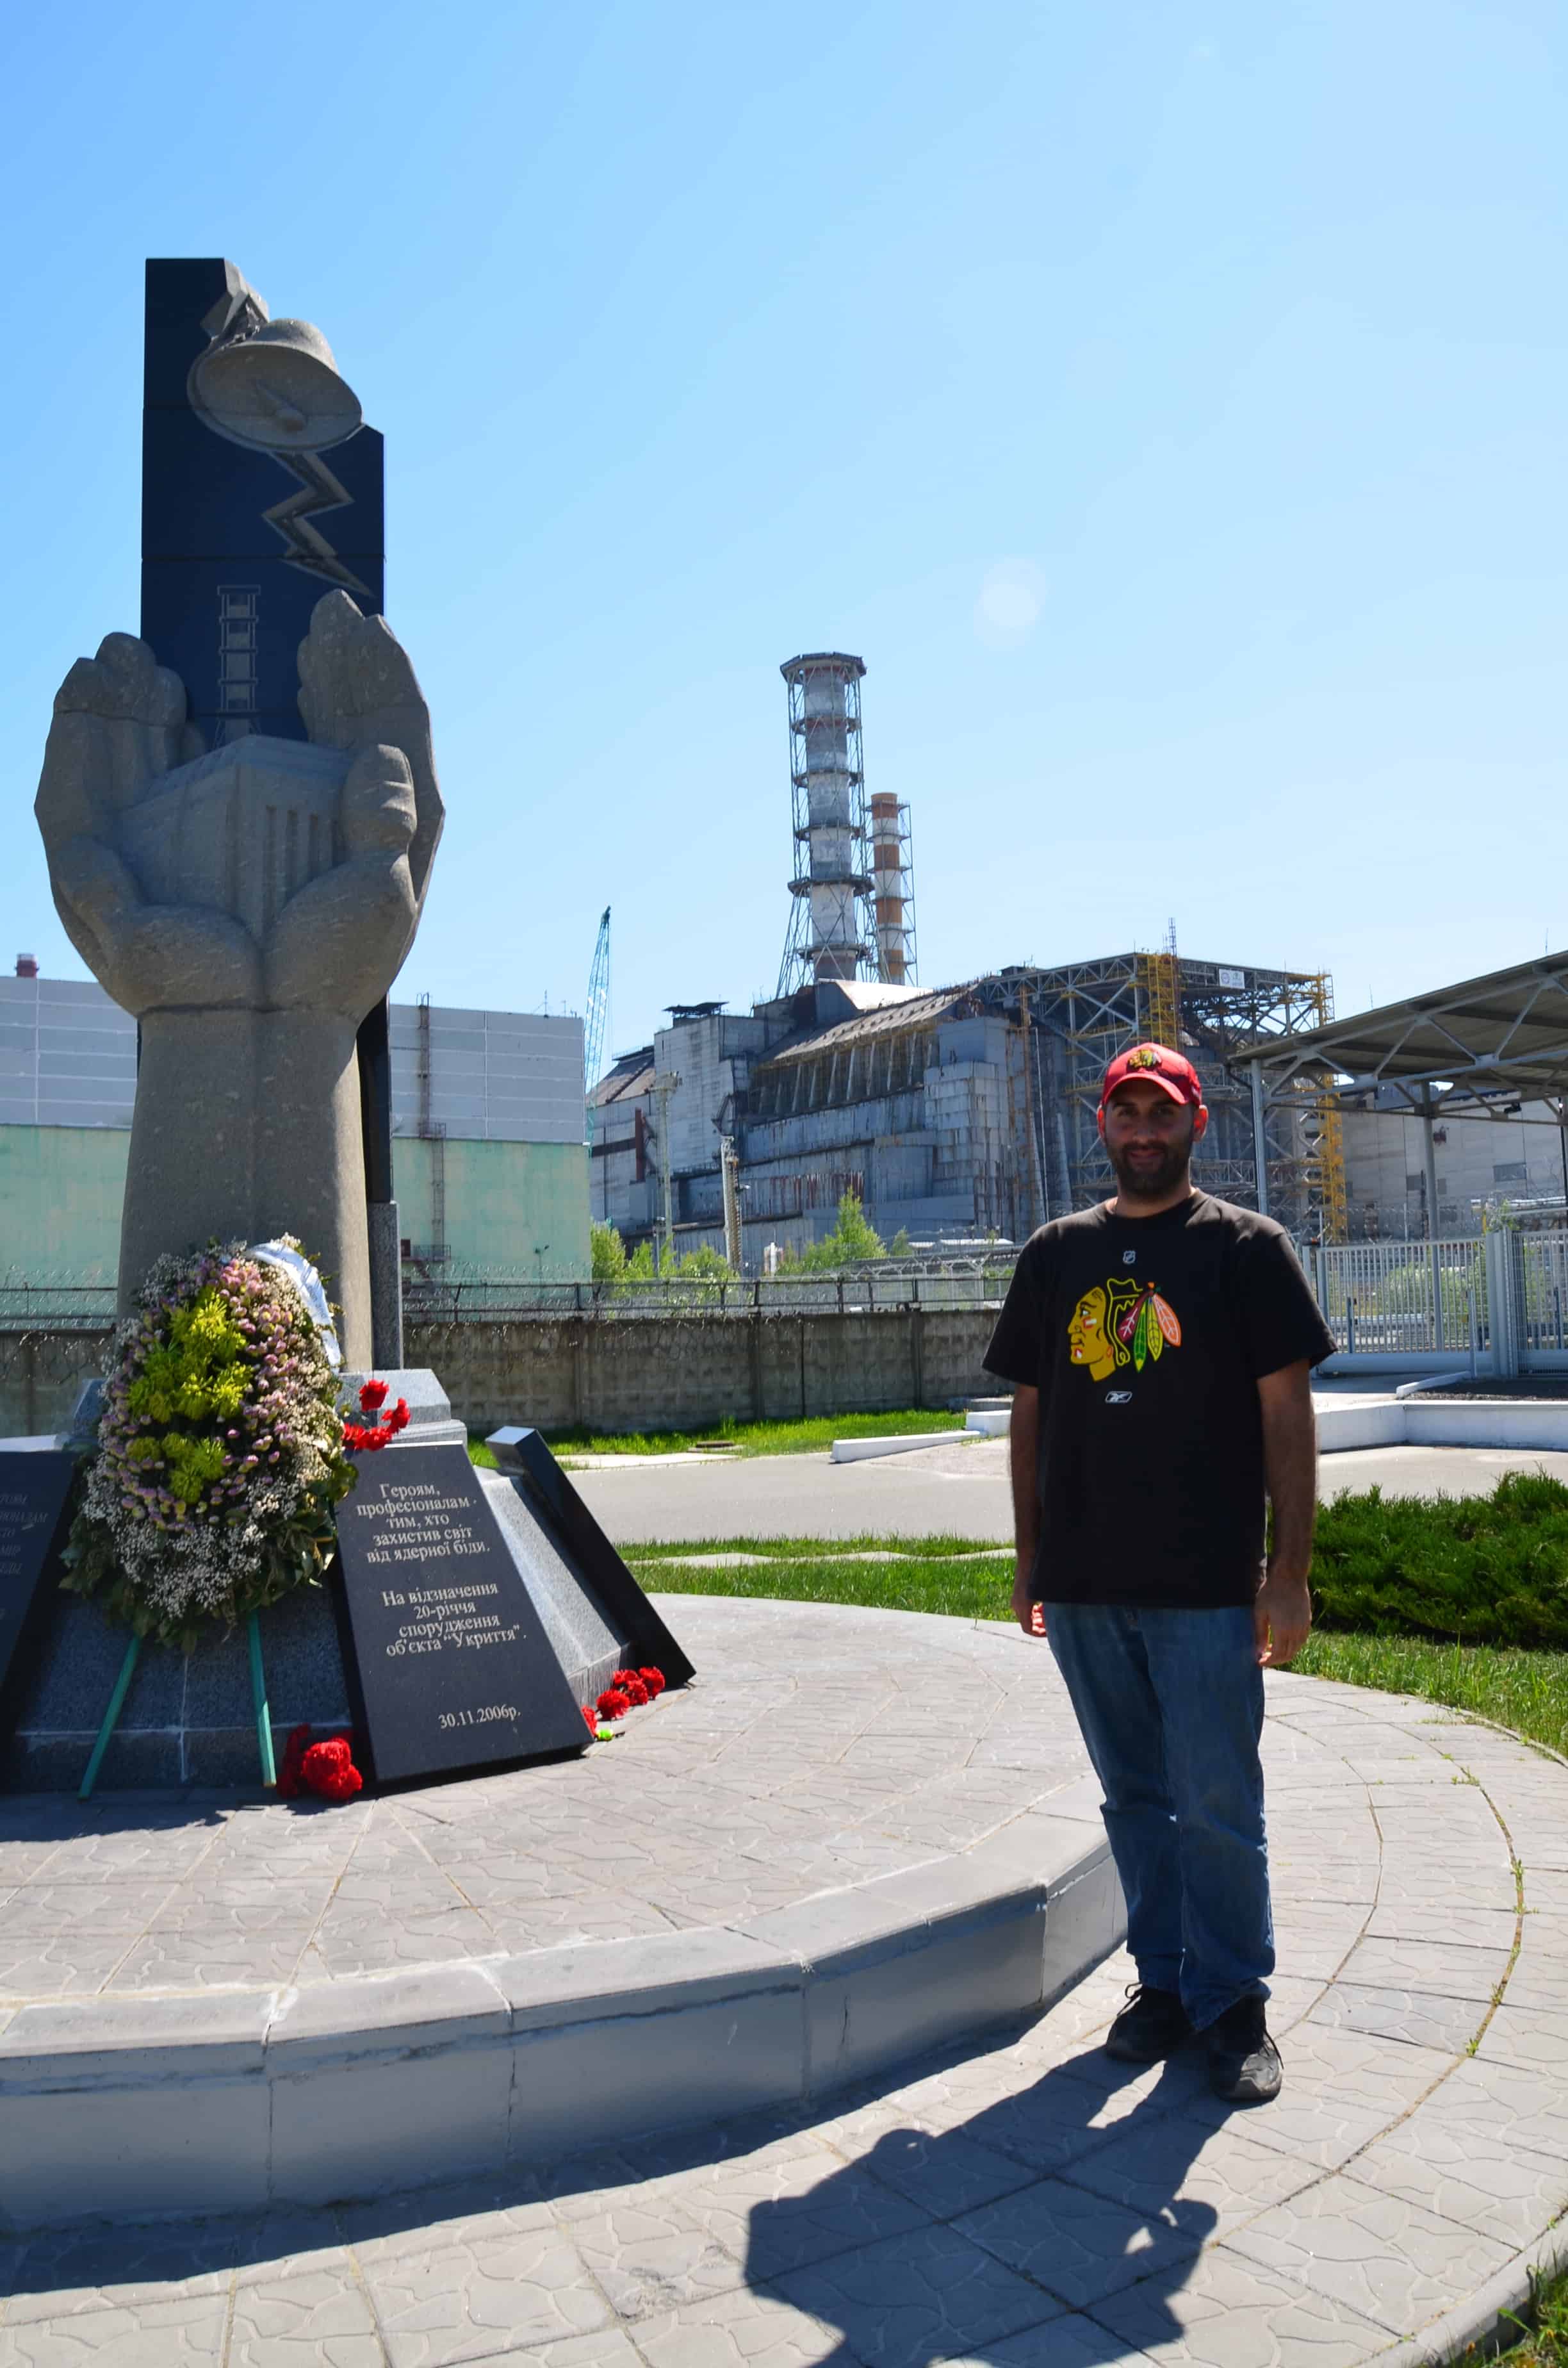 Me at Reactor #4 at Chernobyl Nuclear Power Plant in Chernobyl Exclusion Zone, Ukraine